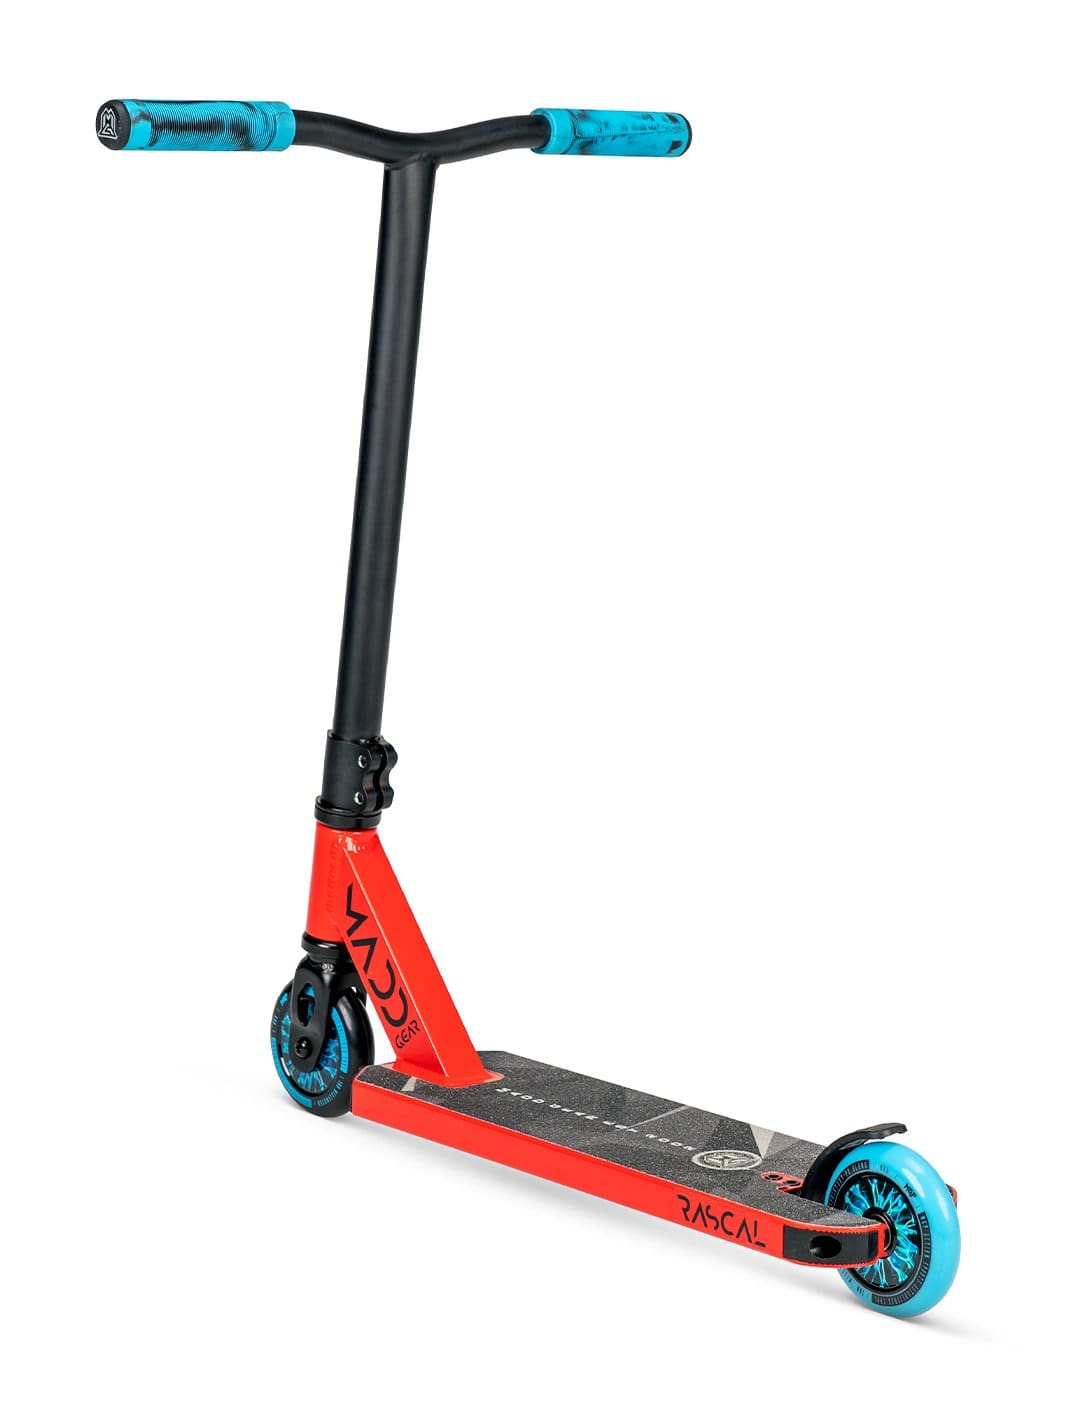 Madd Gear Mad Stunt Scooter Pro Complete Renegade Rascal Red Blue Boys Girls Kids Children